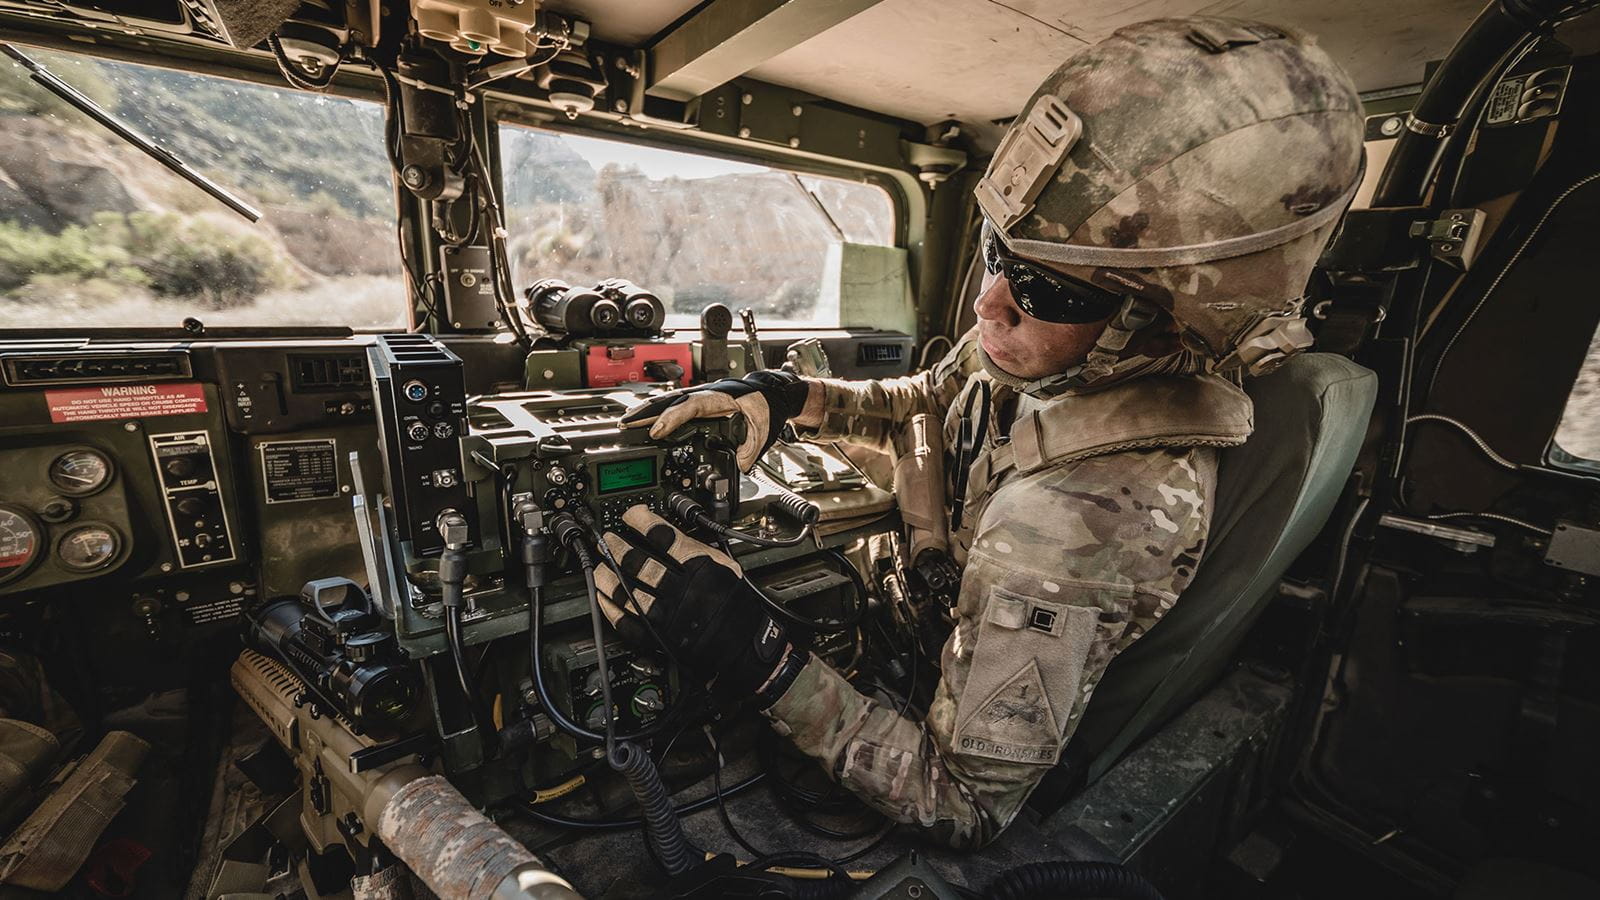 Soldier inside military vehicle